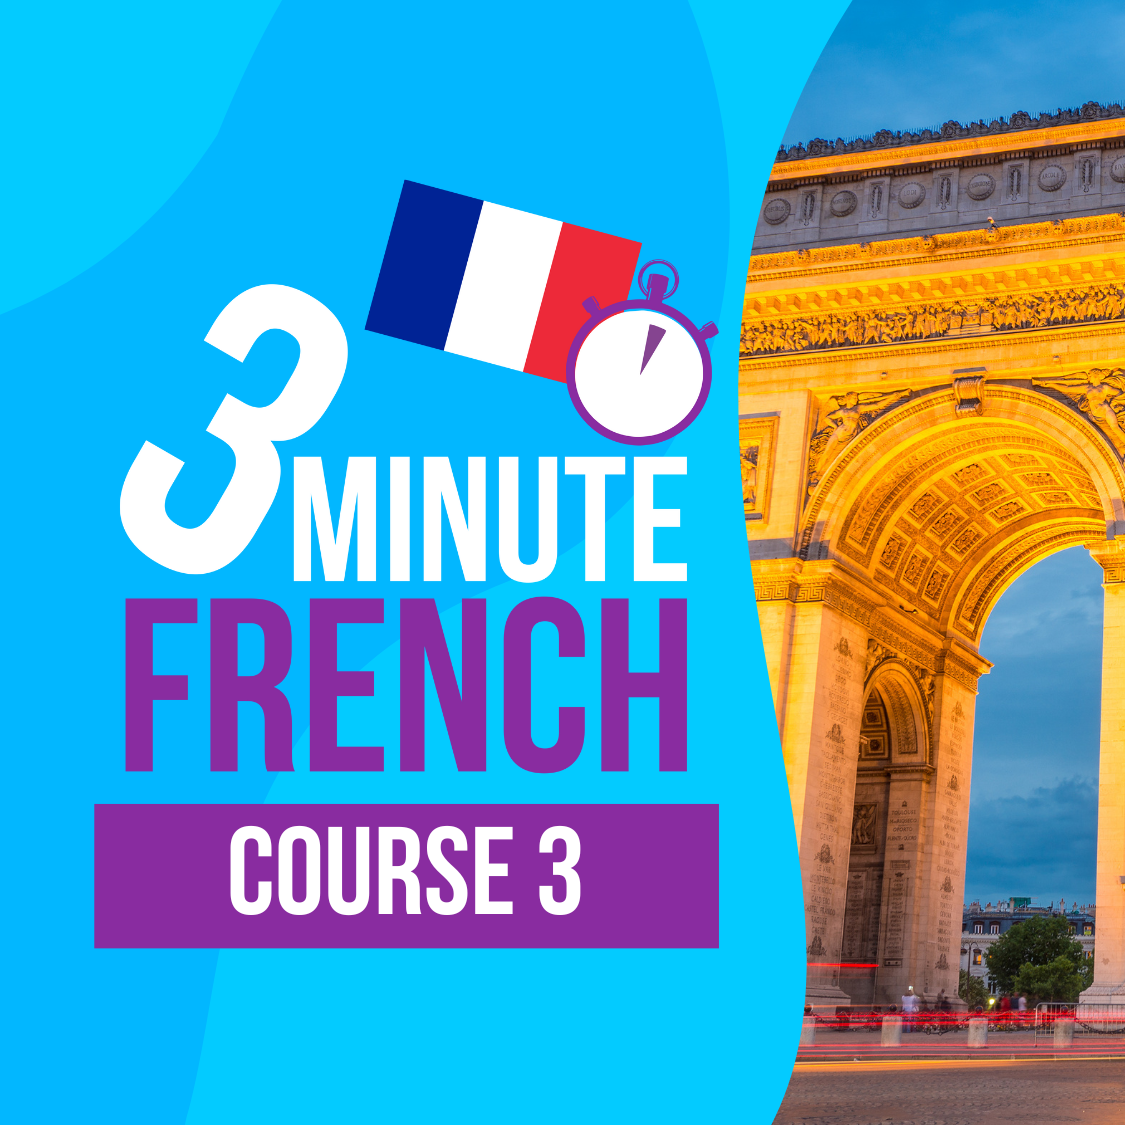 3 Minute French - Course 3